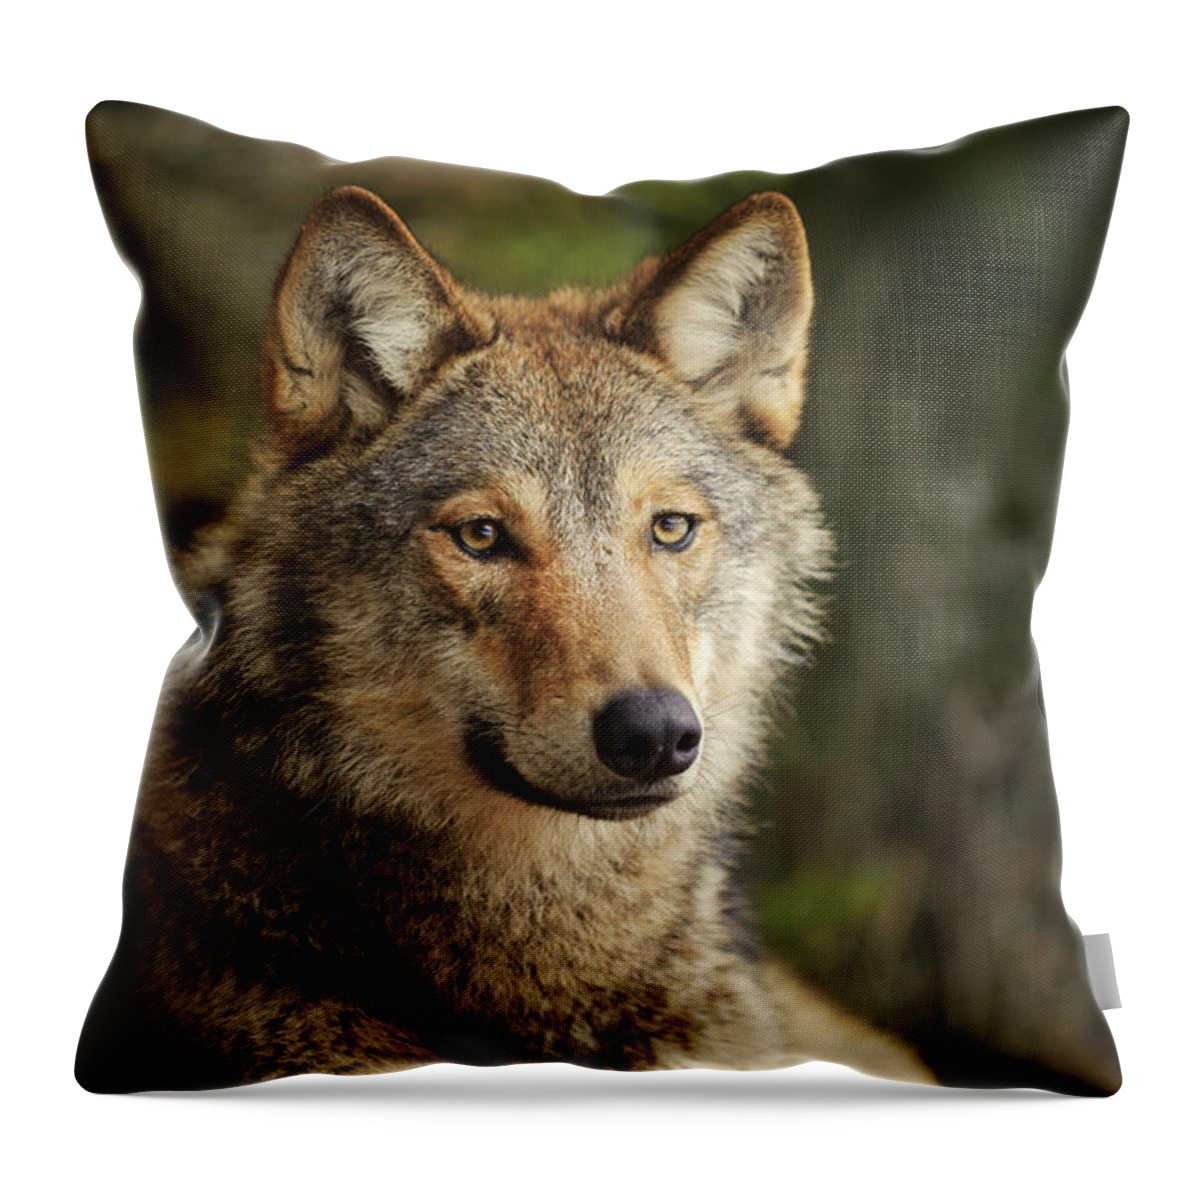 00582045 Throw Pillow featuring the photograph Russian Wolf by Sergey Gorshkov